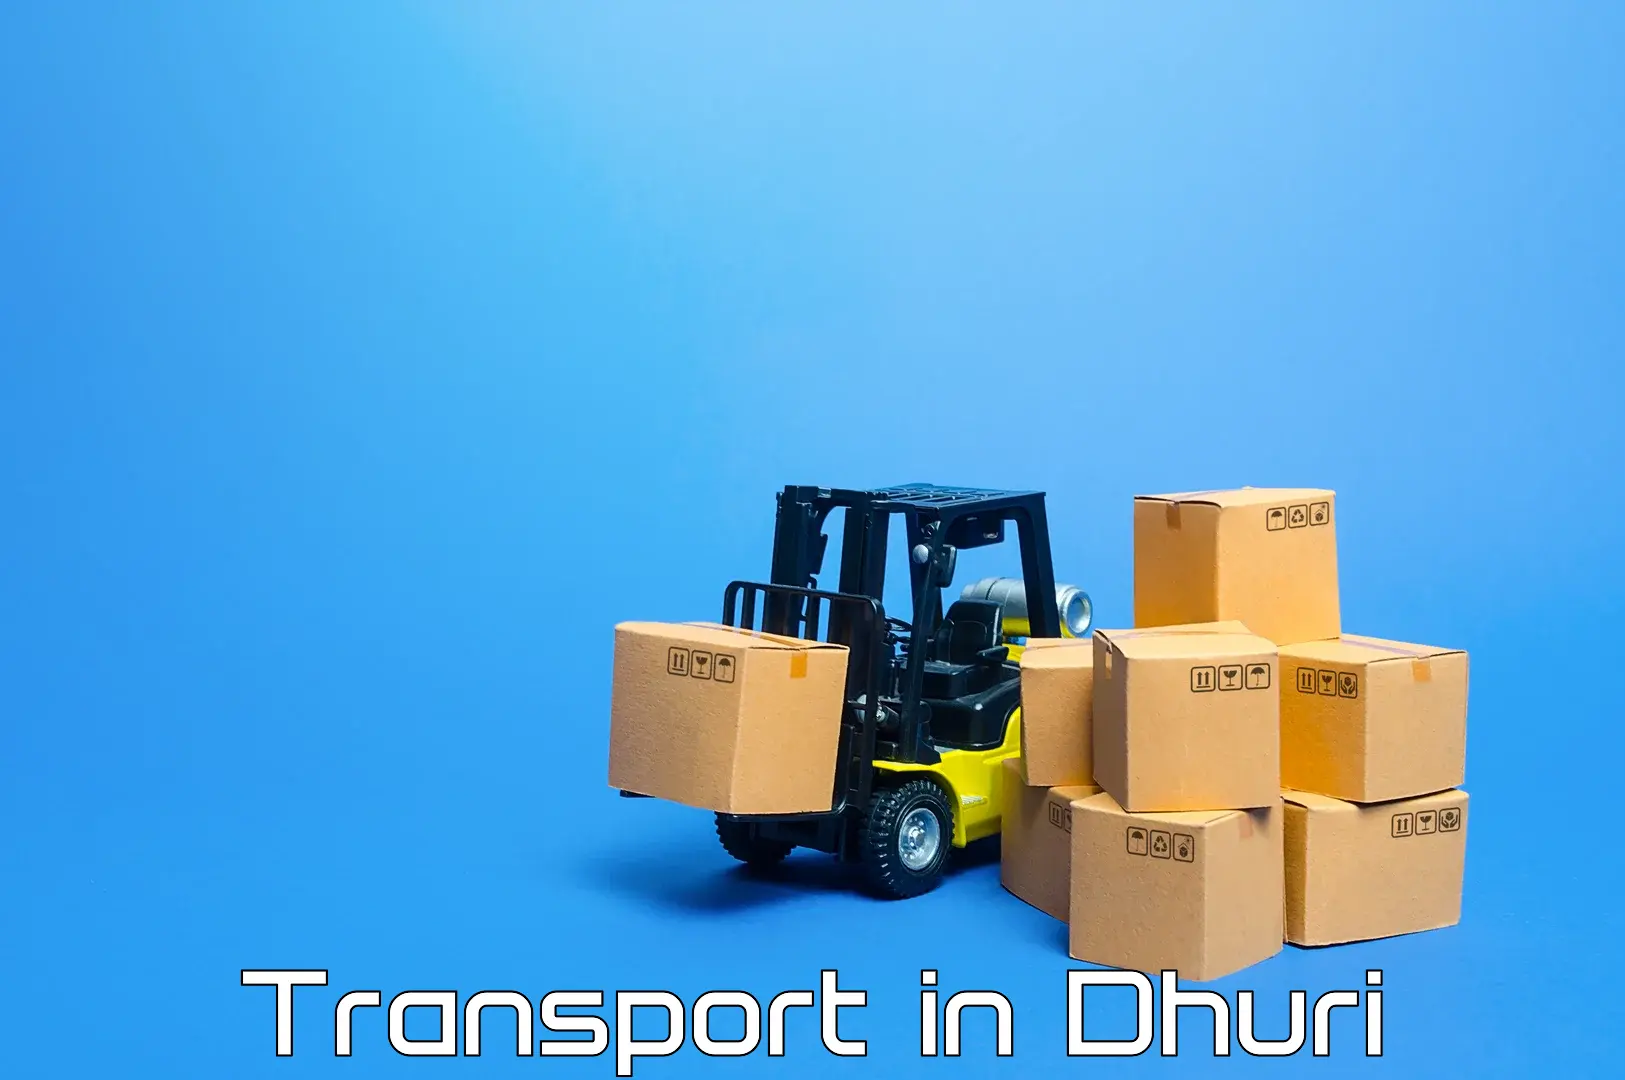 Daily transport service in Dhuri